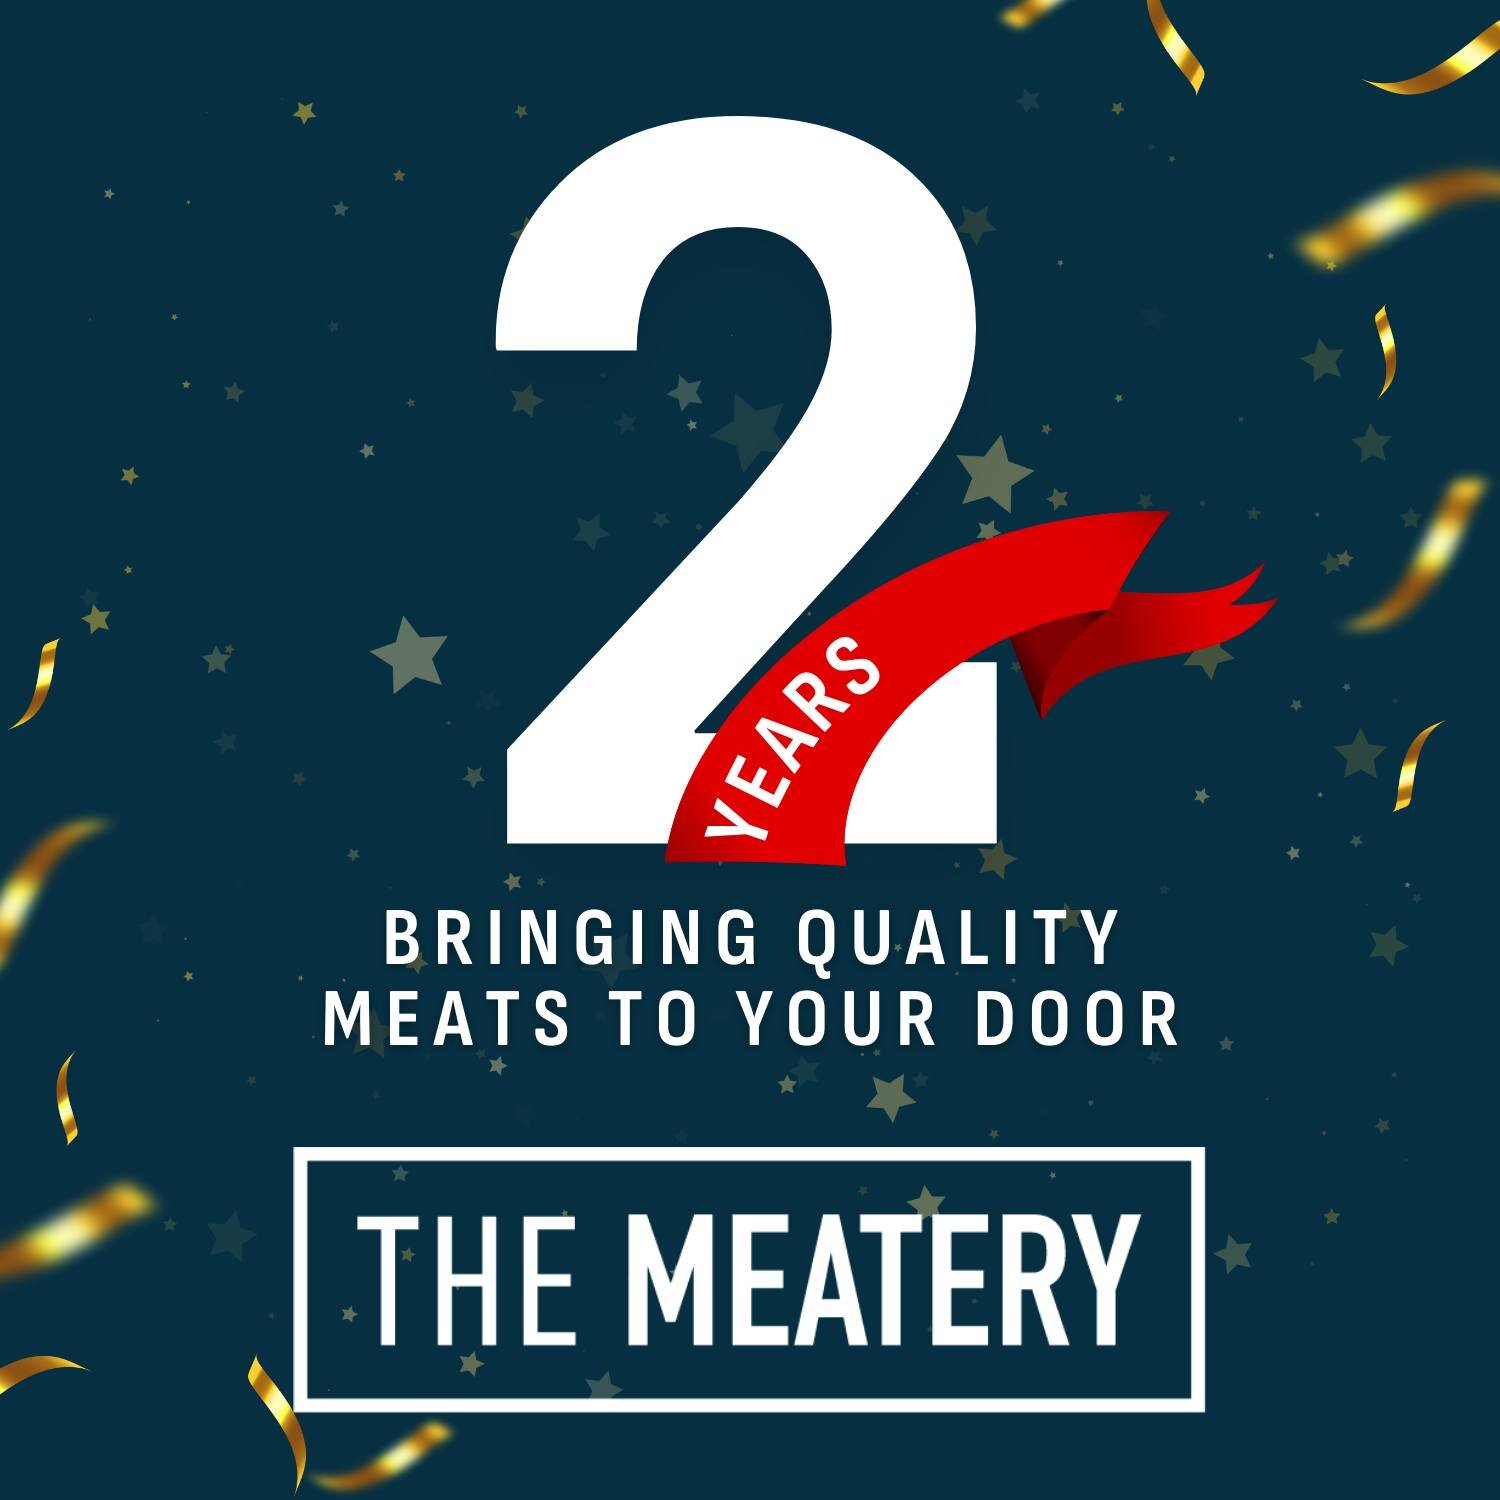 Two incredible years at The Meatery, and it's all thanks to you! 🎉 We started with a simple idea: delivering top-quality meat from the finest small family farms and producers directly to your door,  and we've cherished every moment. Your support has